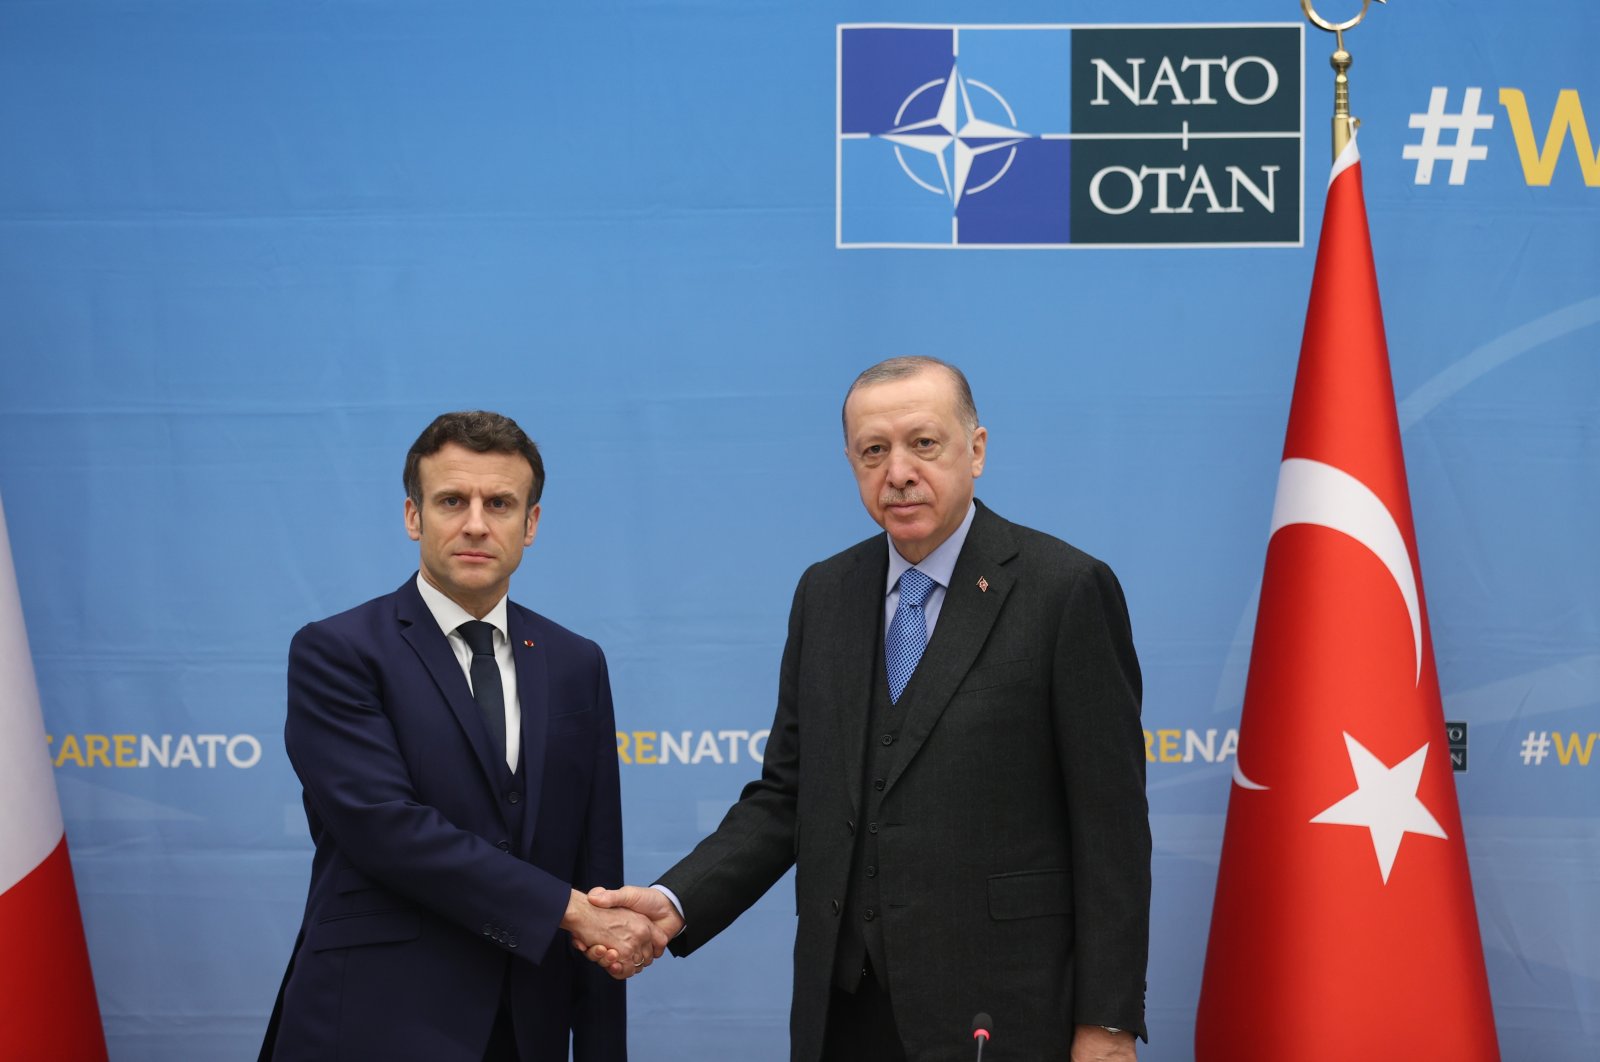 French President Emmanuel Macron, left, and his Turkish counterpart Recep Tayyip Erdoğan shake hands as they attend a bilateral meeting ahead of a NATO summit to discuss Russia&#039;s invasion of Ukraine, at the NATO headquarters in Brussels, Belgium on Mar. 24, 2022. (IHA Photo)